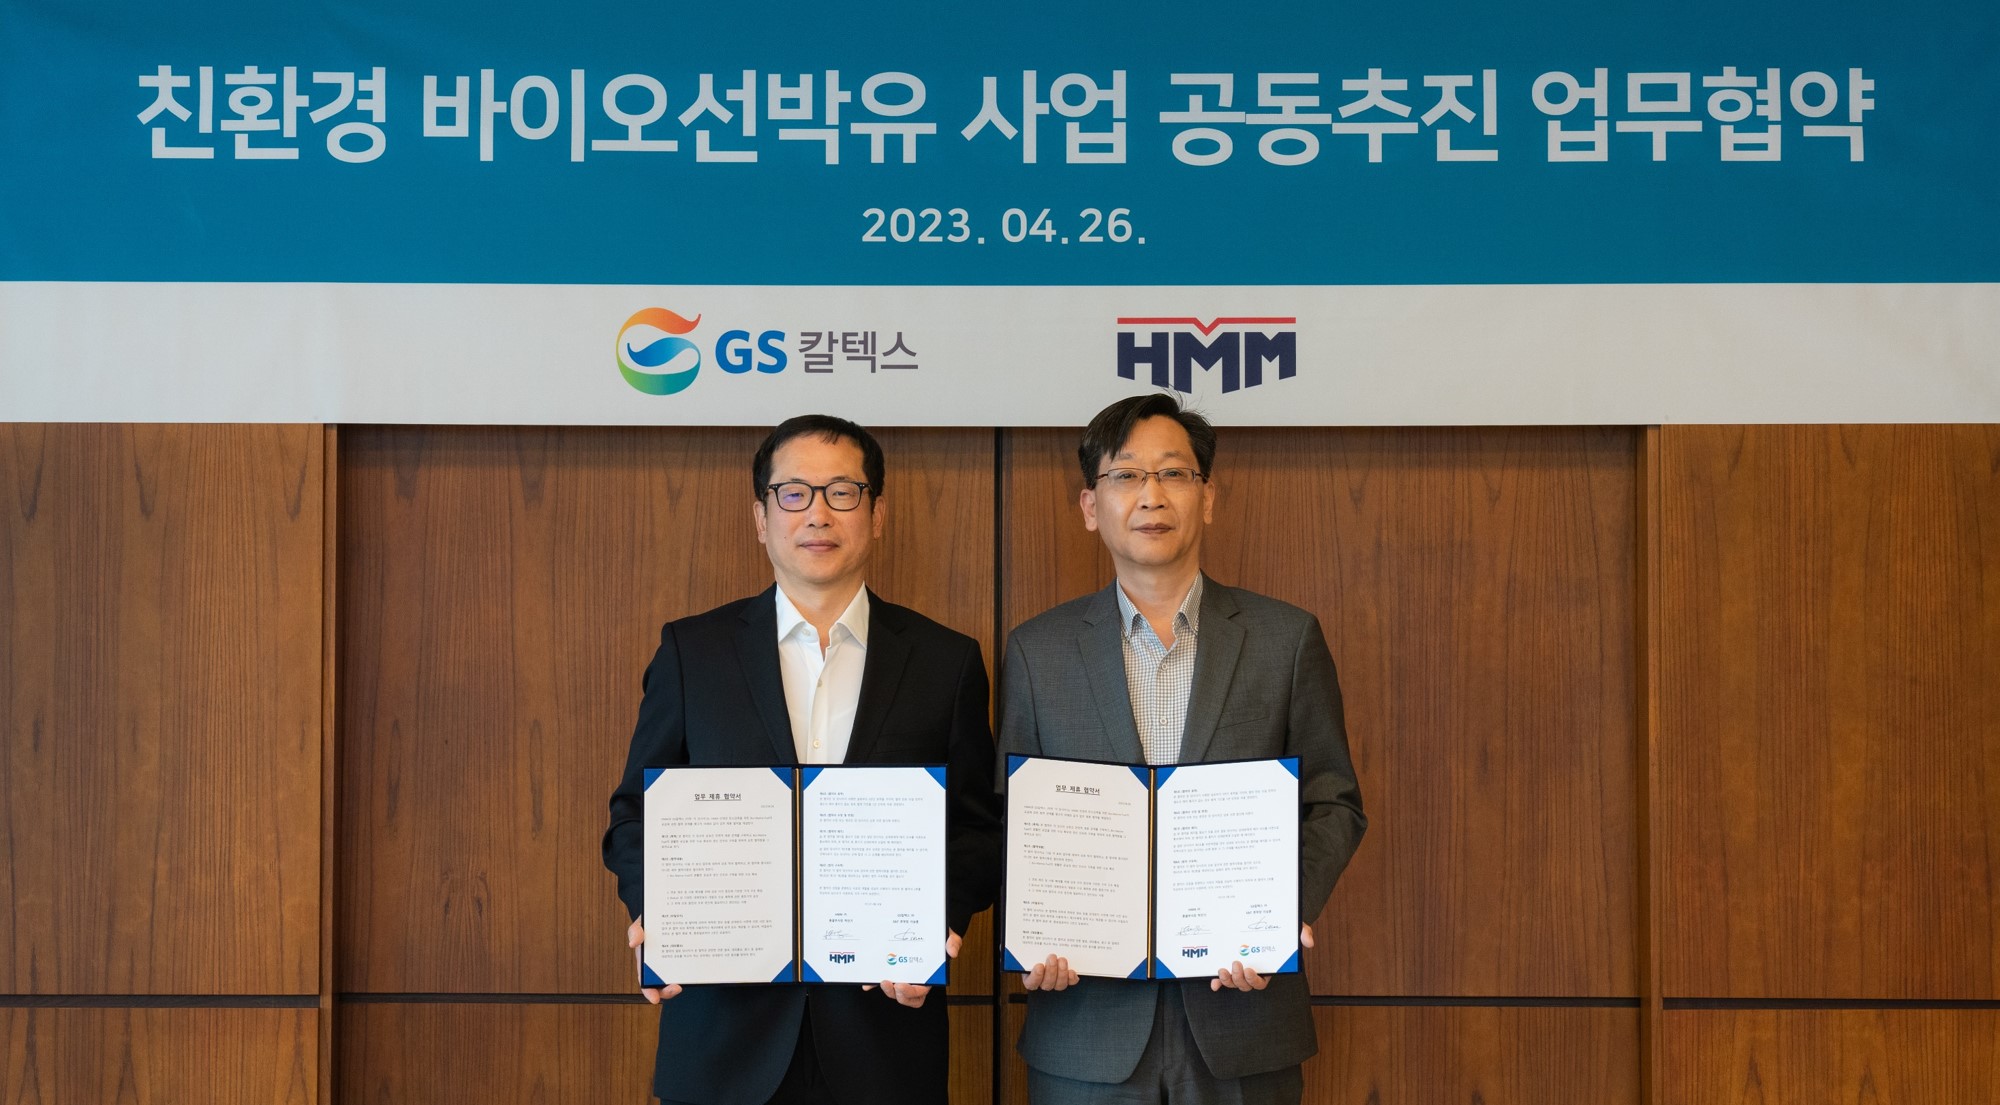 HMM signs MoU with GS Caltex to secure marine biofuels